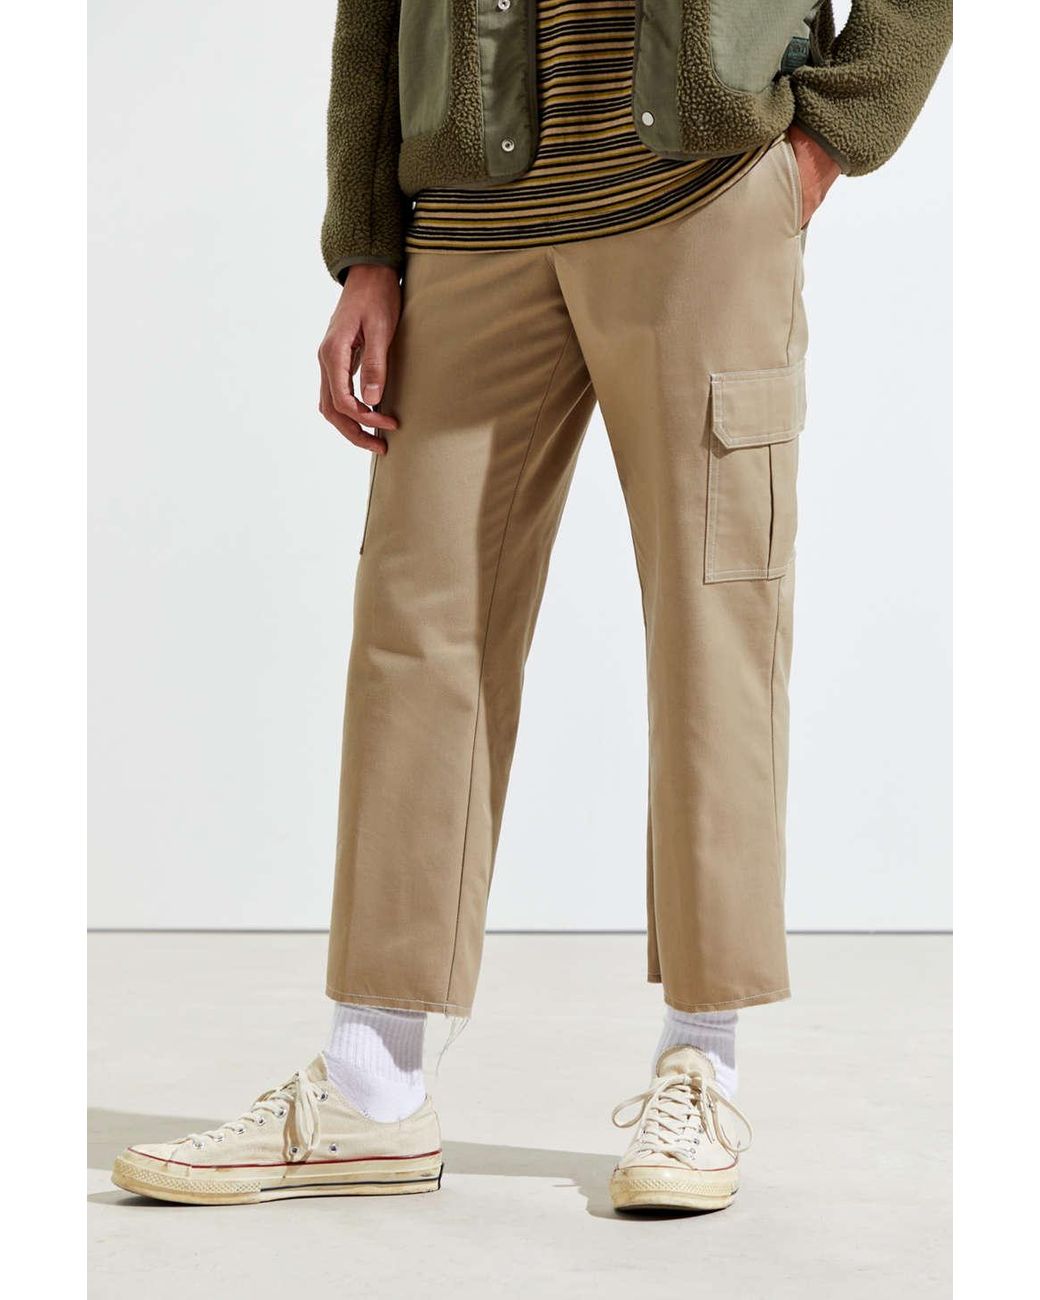 dickies uo pants,Quality assurance,protein-burger.com